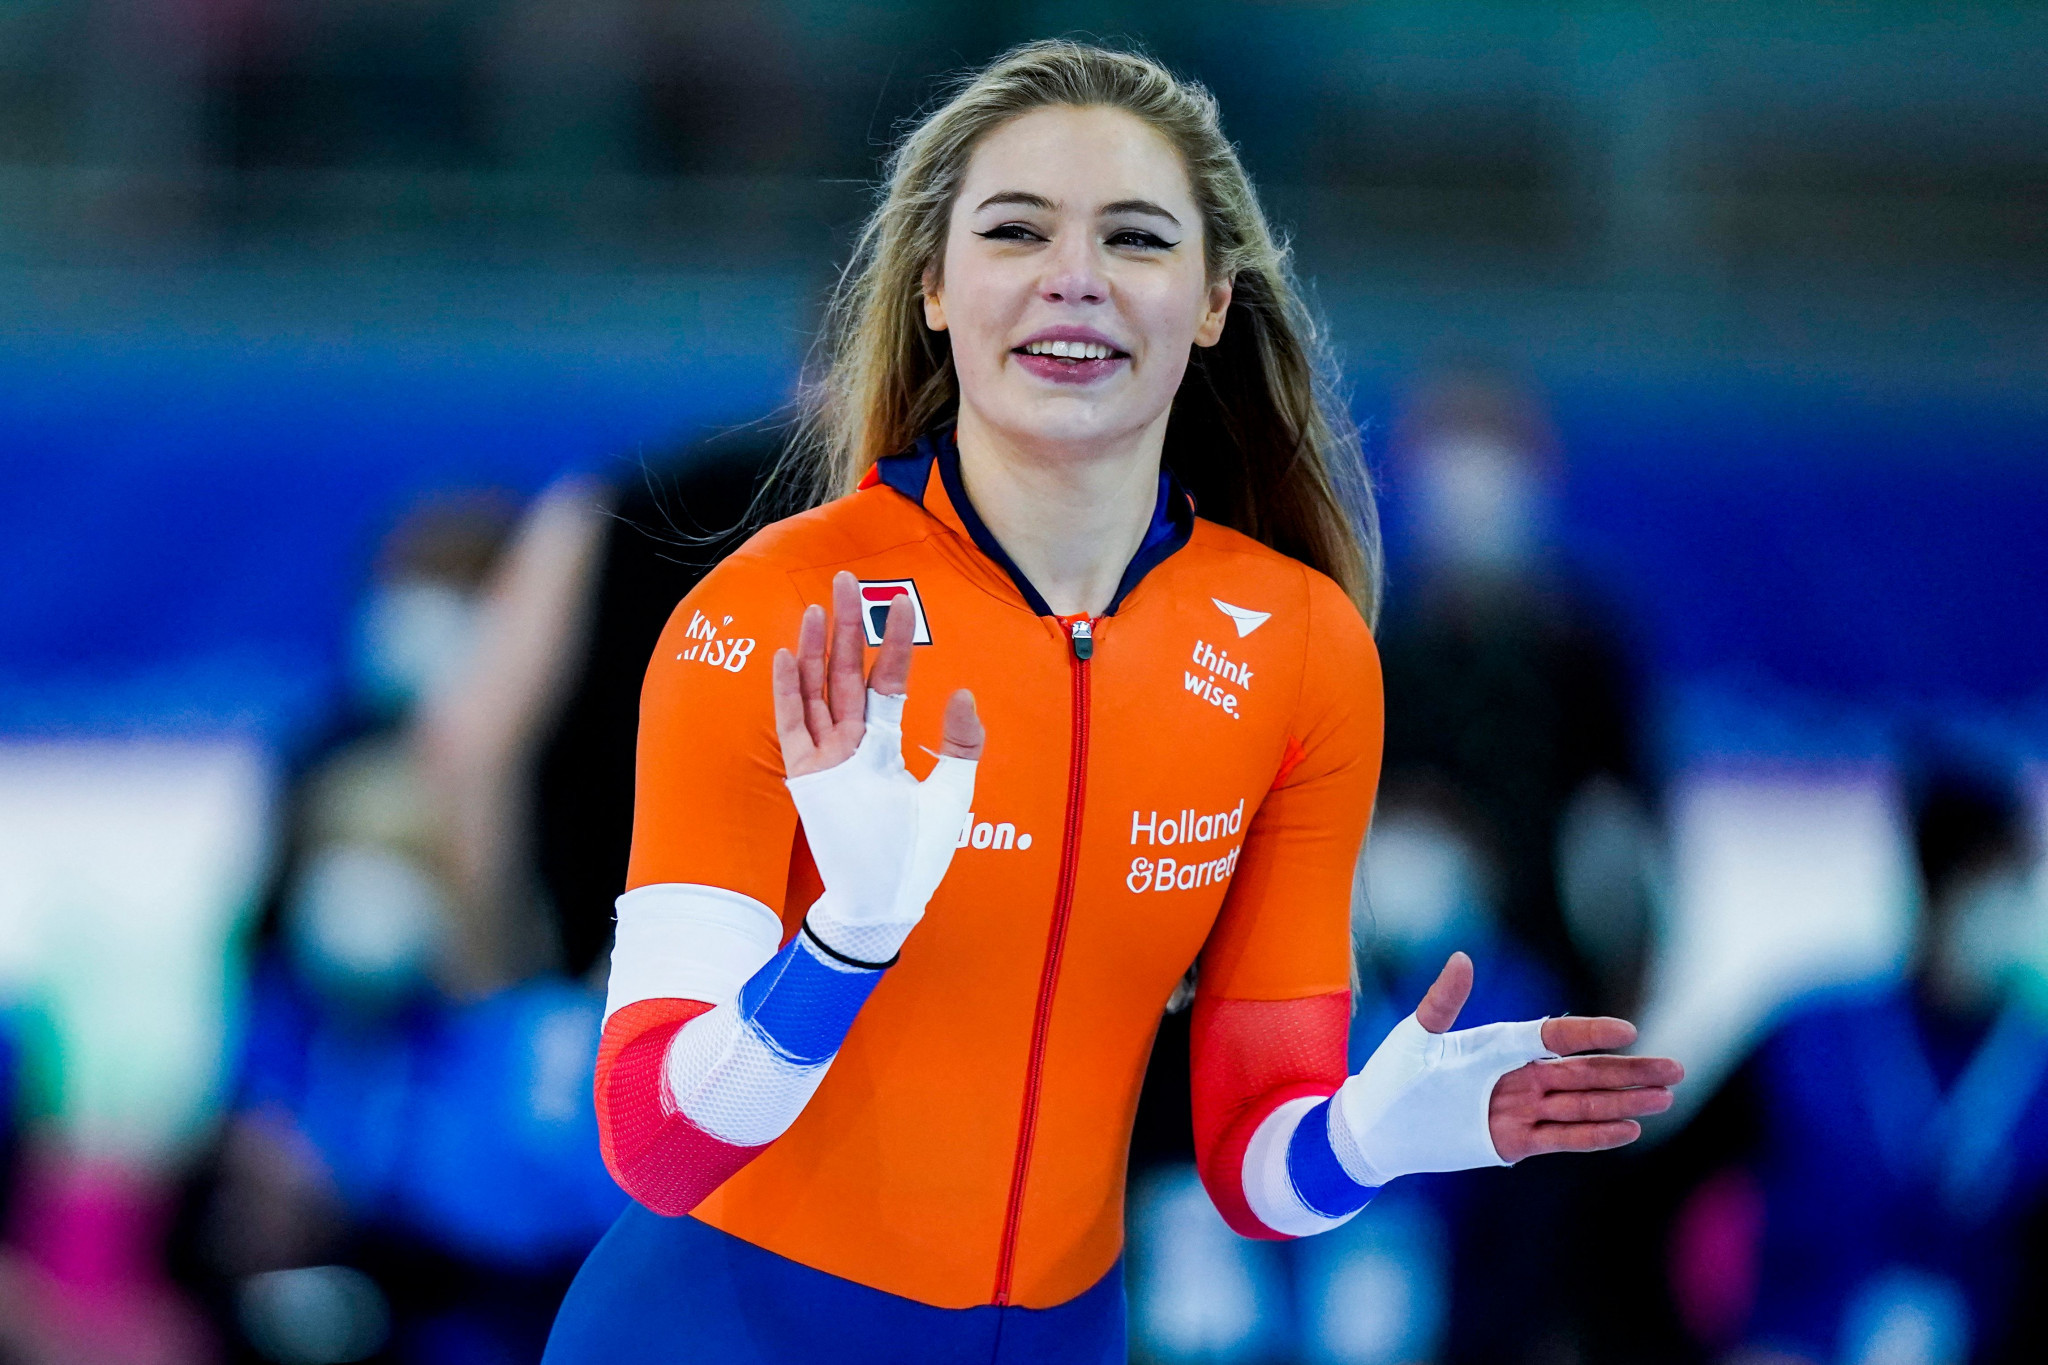 Leerdam and Krol win sprint titles on day two of World Speed Skating Championships